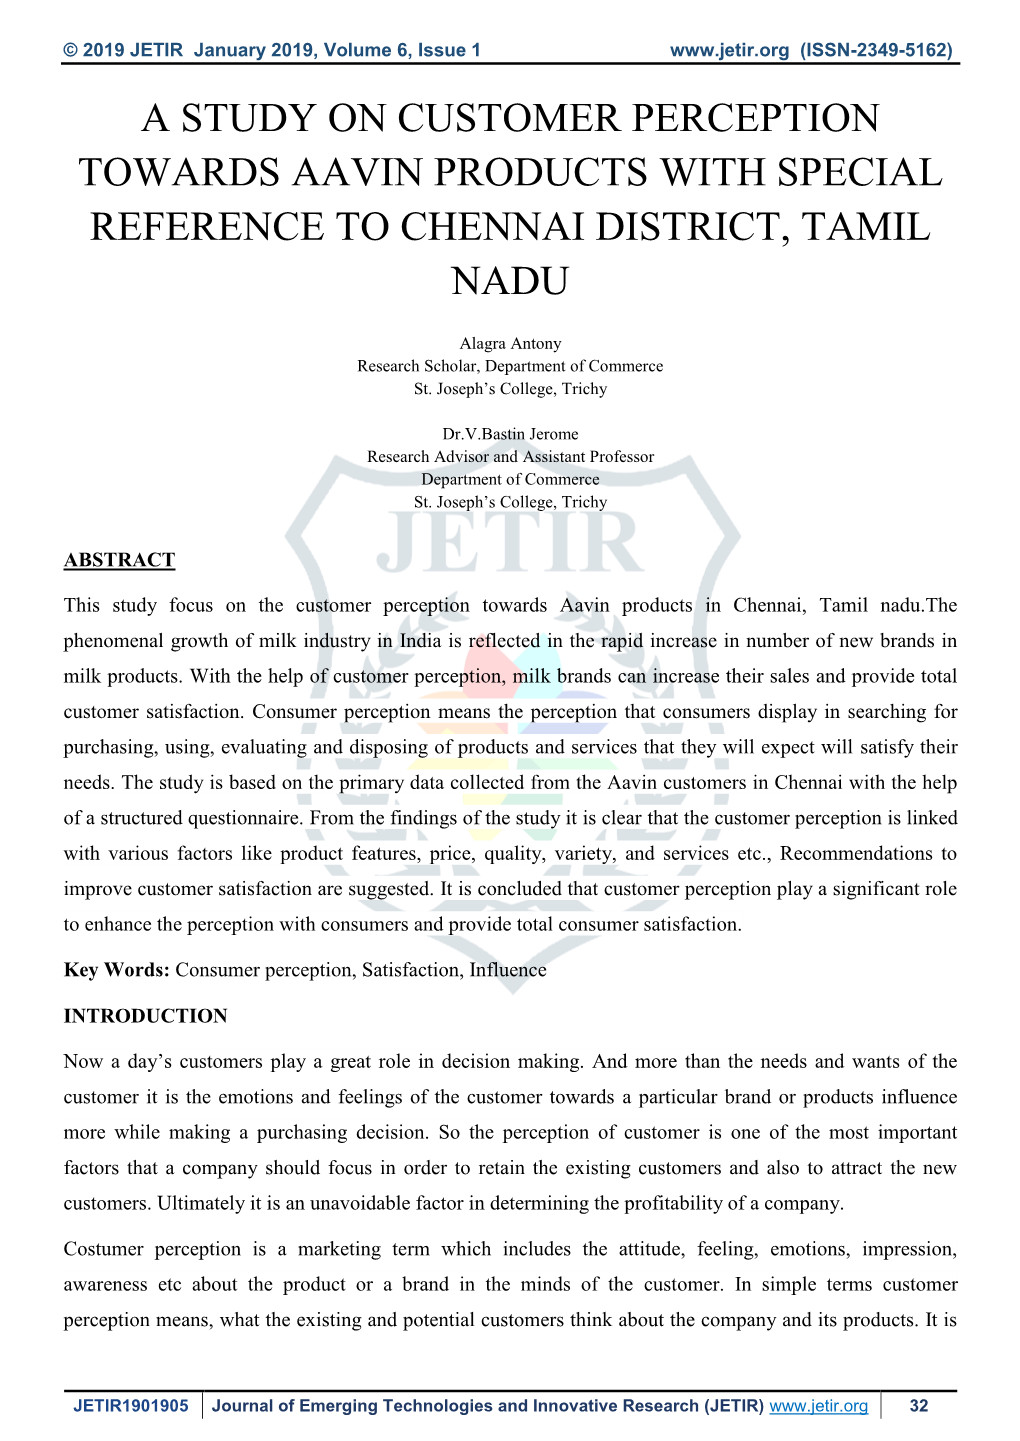 A Study on Customer Perception Towards Aavin Products with Special Reference to Chennai District, Tamil Nadu